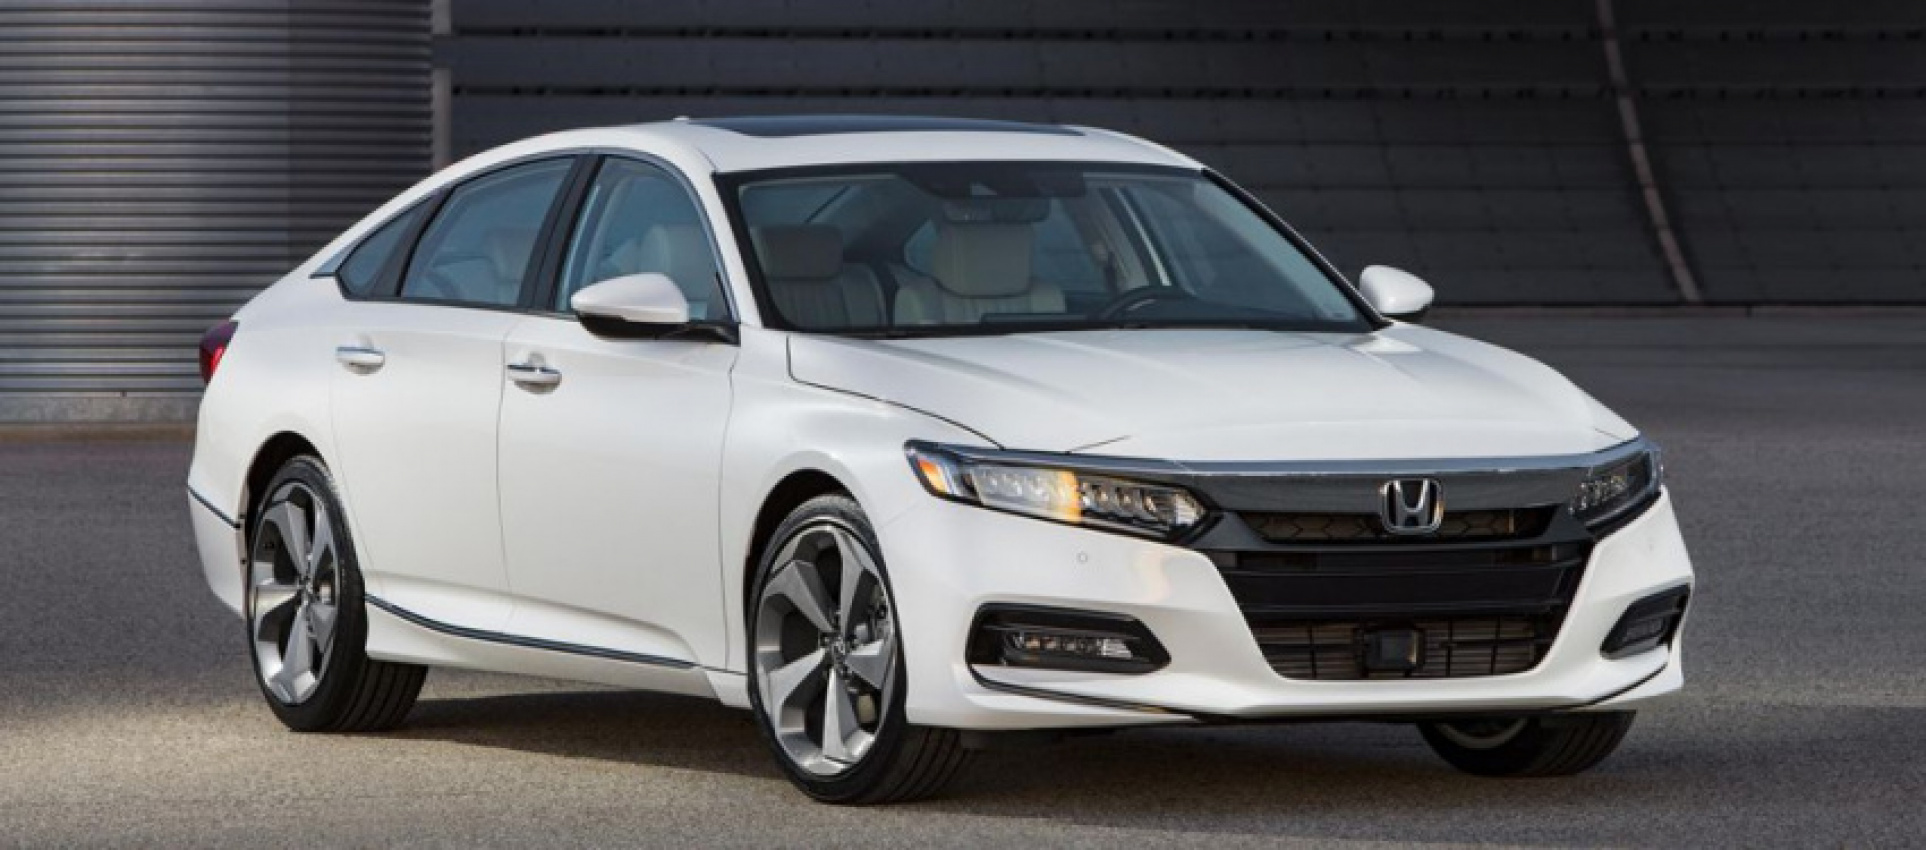 autos, cars, honda, autos honda accord, honda accord, new honda accord radically revised to appeal to younger buyers